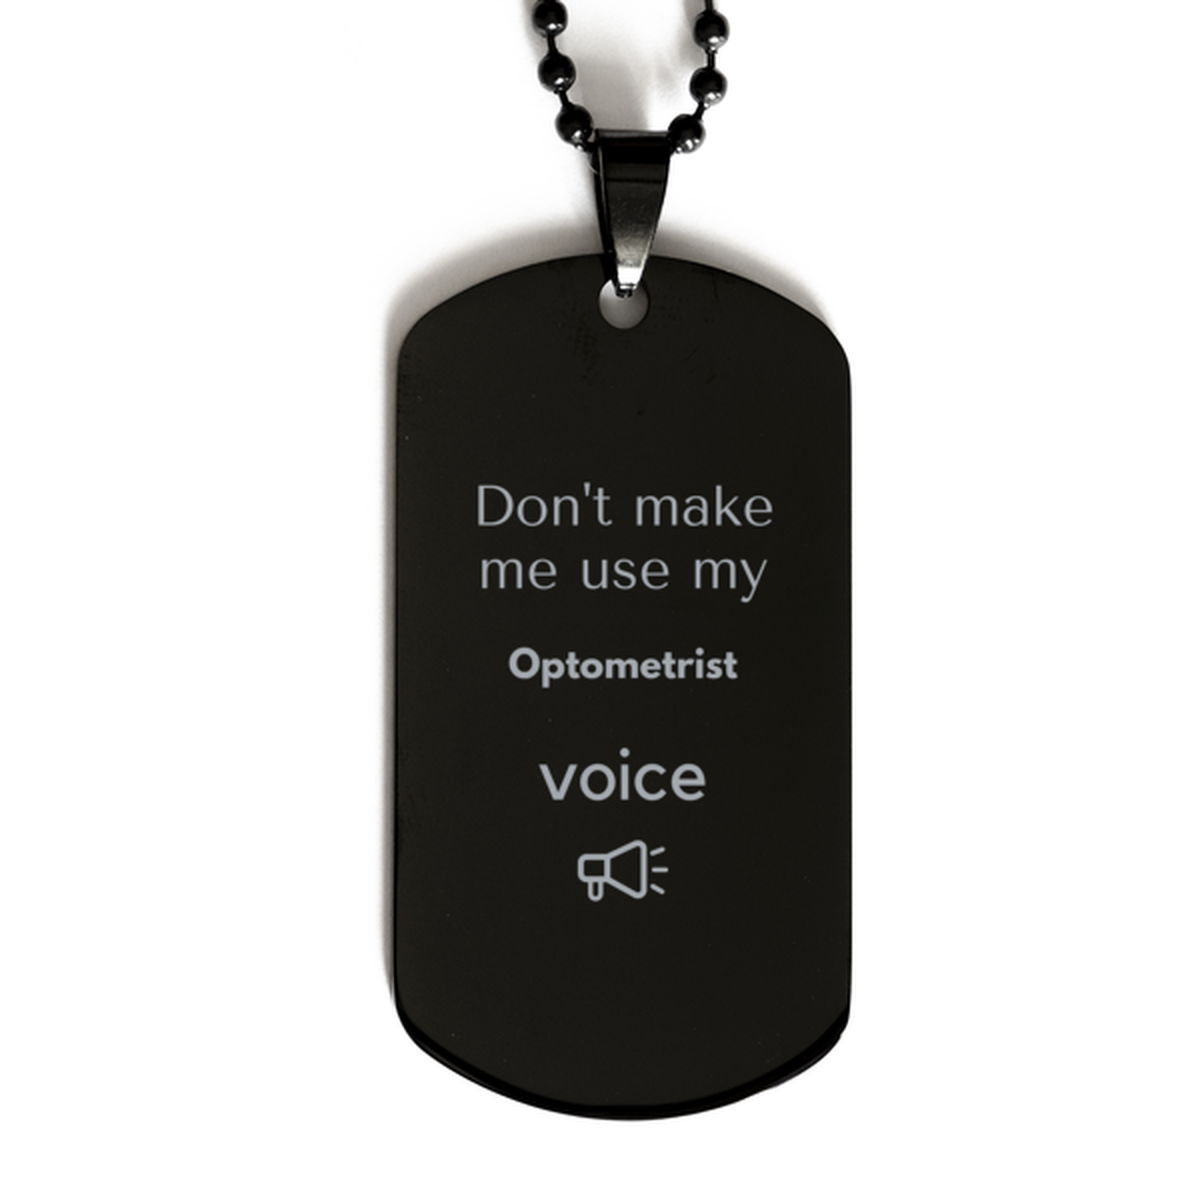 Don't make me use my Optometrist voice, Sarcasm Optometrist Gifts, Christmas Optometrist Black Dog Tag Birthday Unique Gifts For Optometrist Coworkers, Men, Women, Colleague, Friends